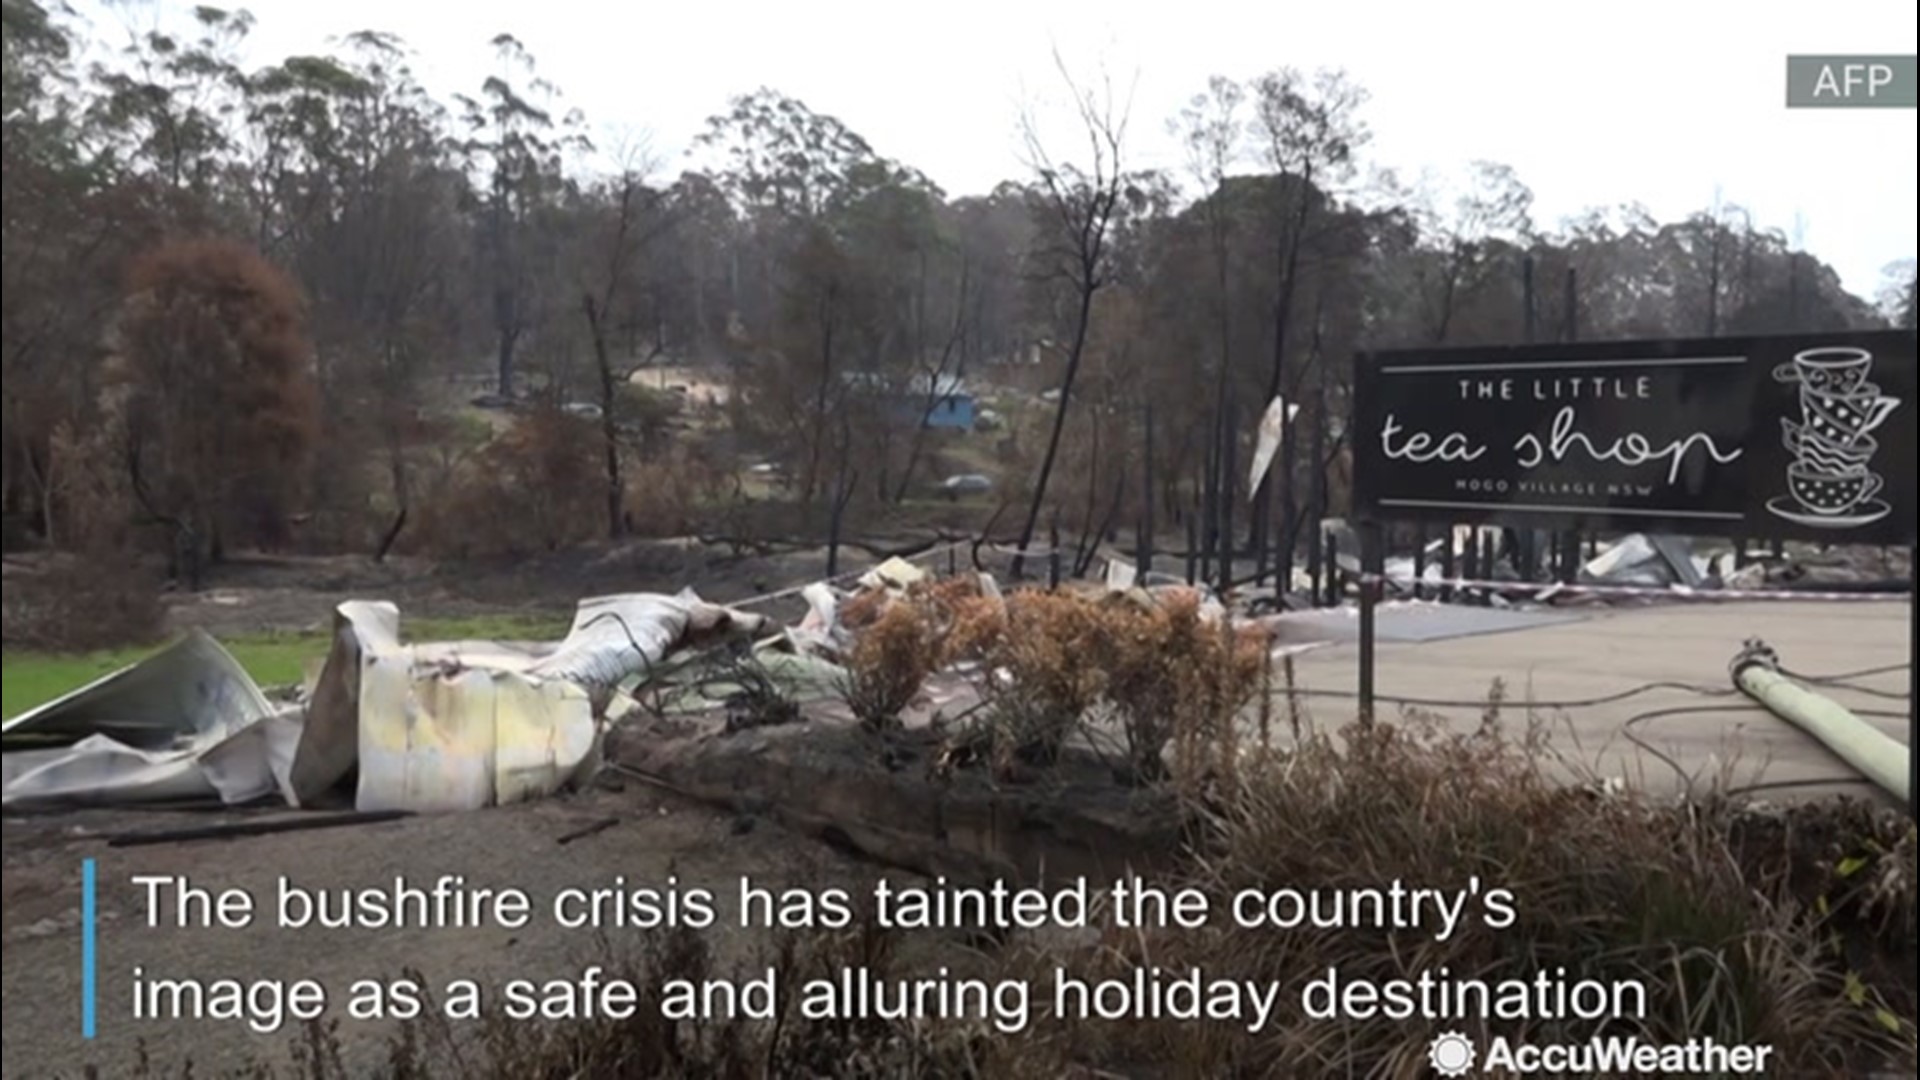 After a month's worth of devastating wildfires, tourism in Australia is feeling the heat.